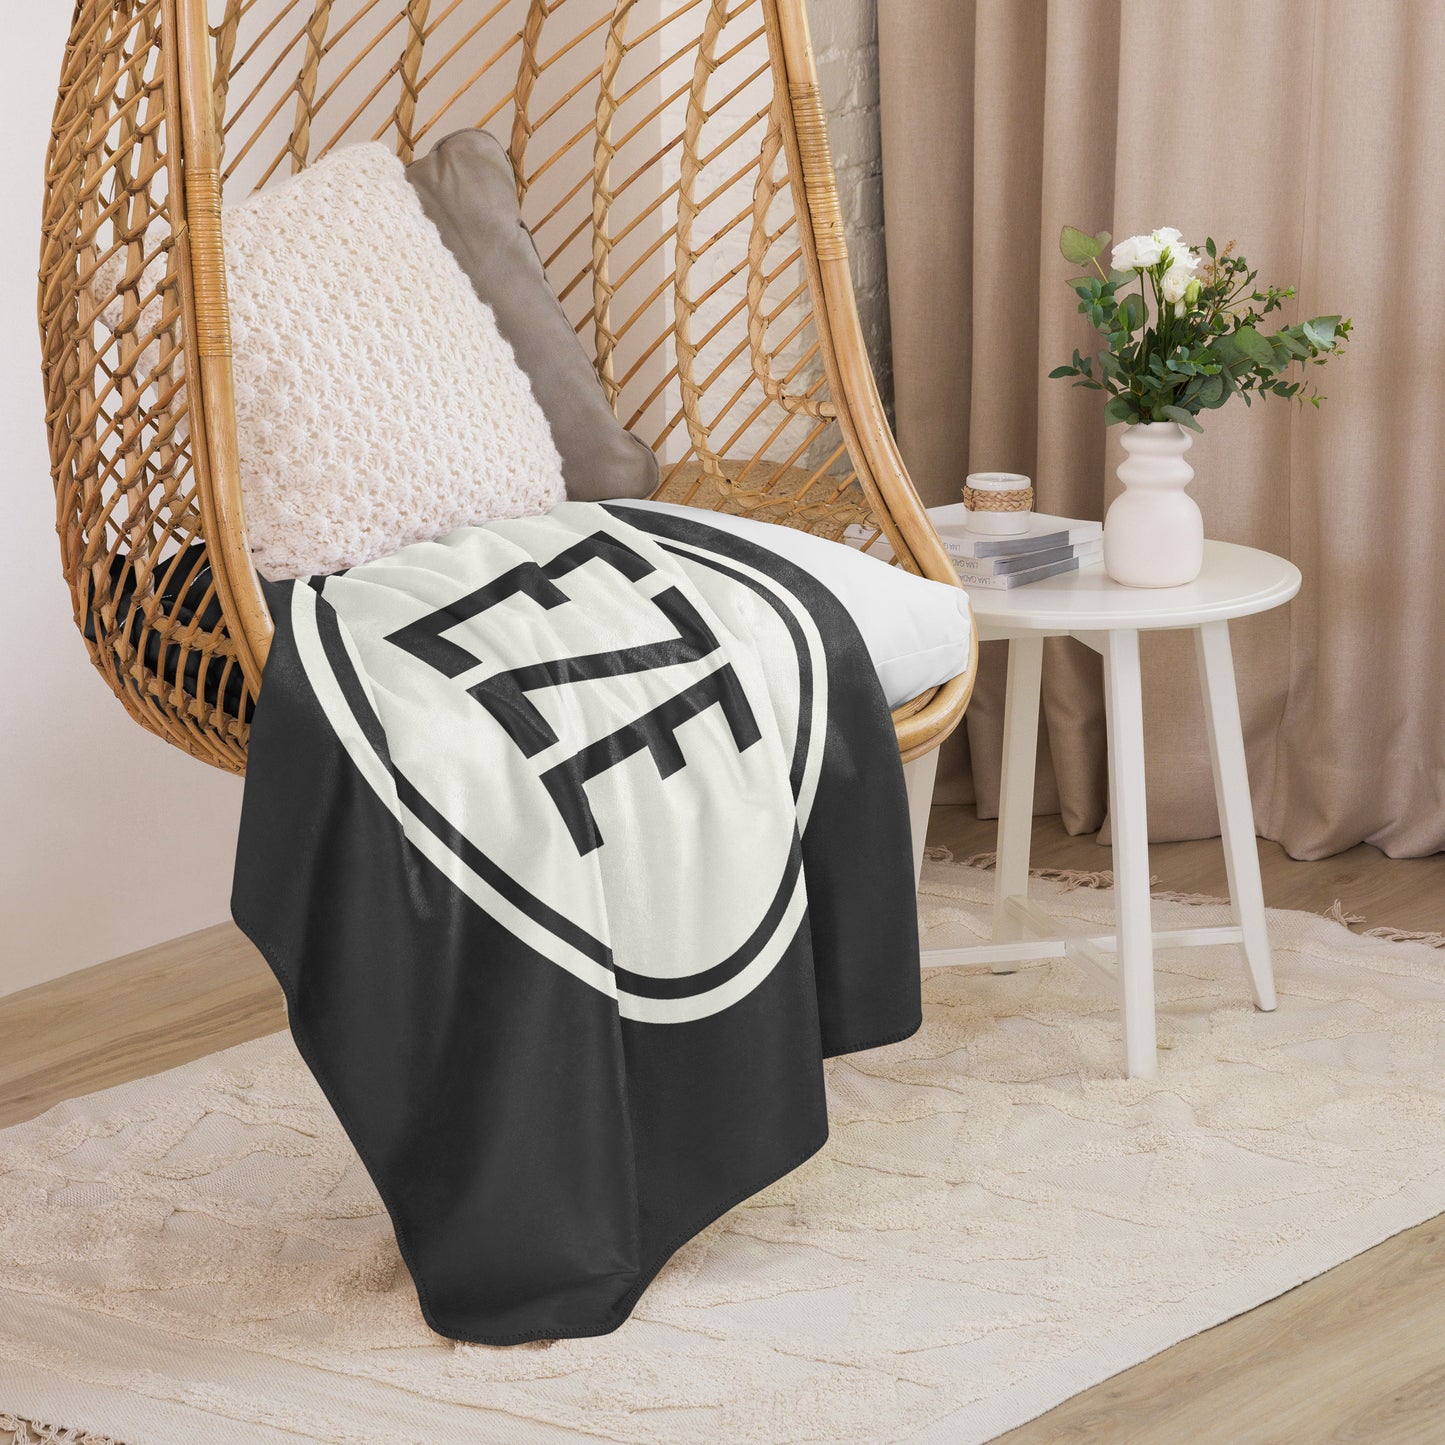 Unique Travel Gift Sherpa Blanket - White Oval • EZE Buenos Aires • YHM Designs - Image 06